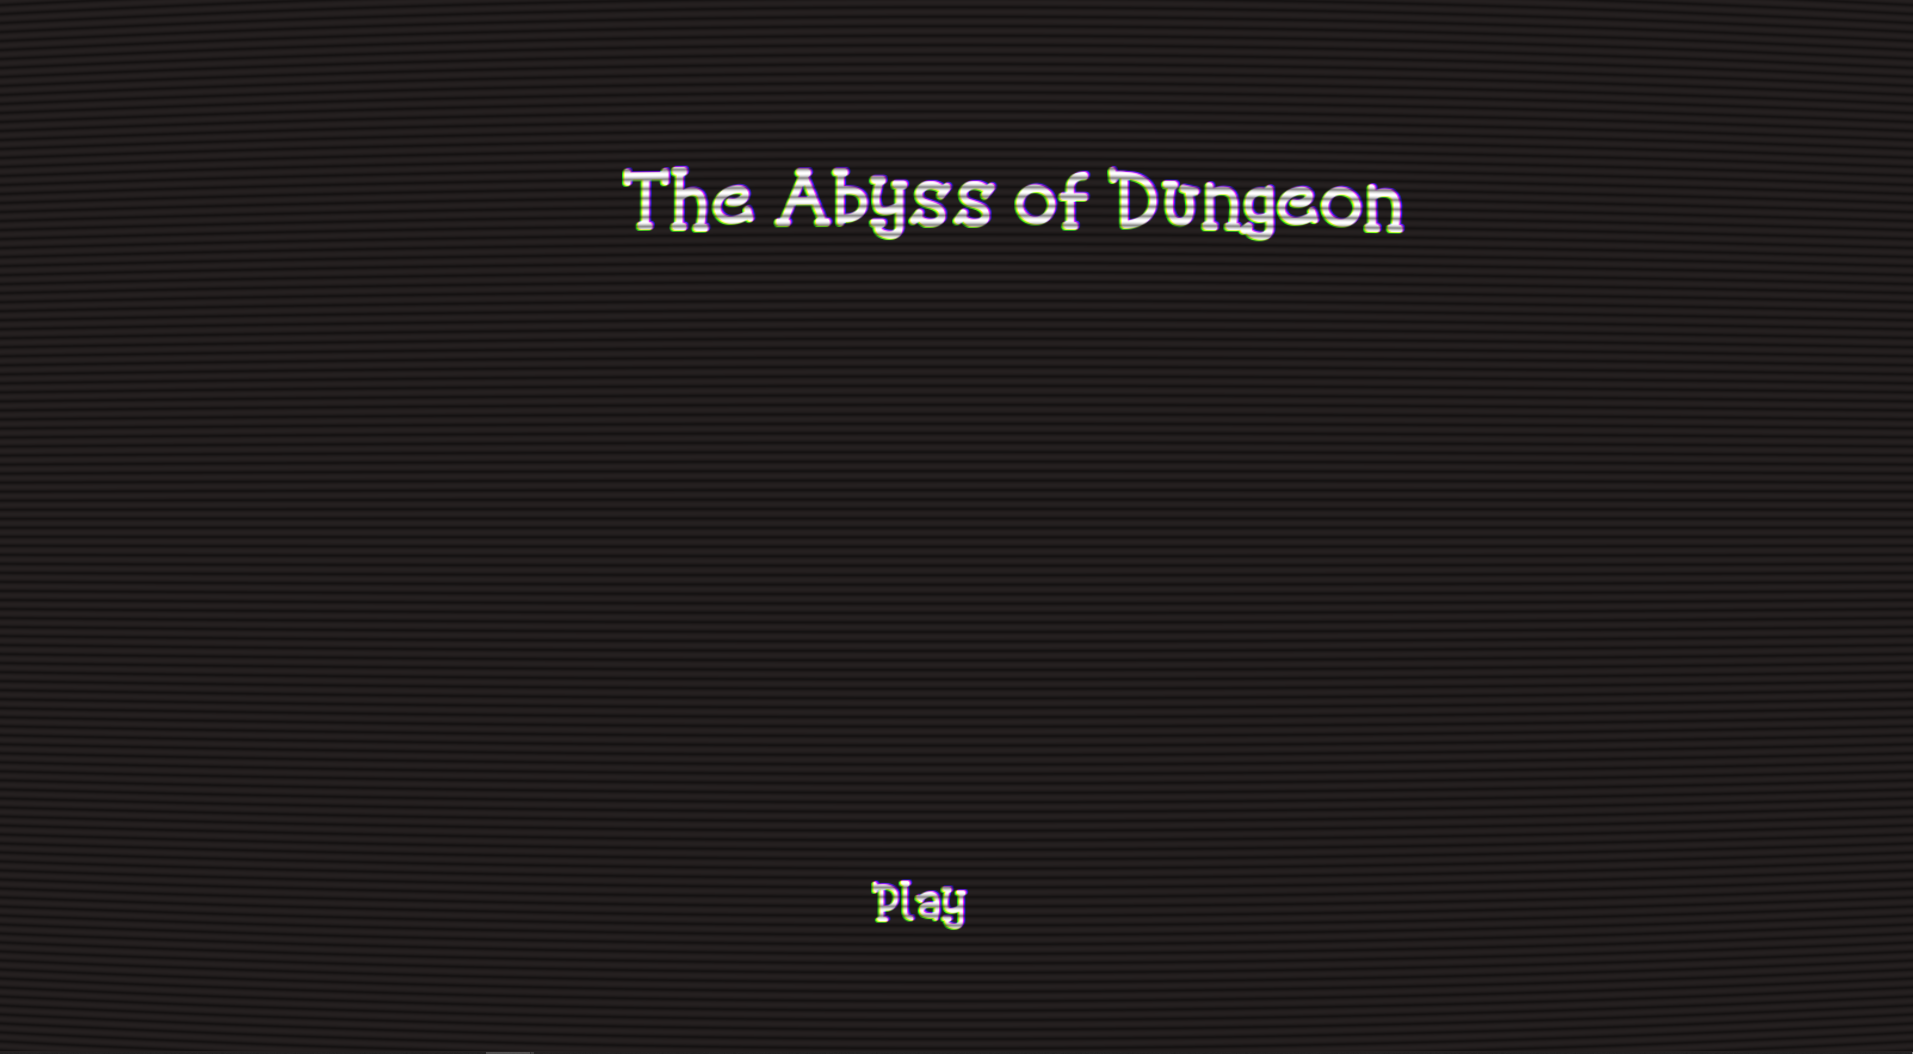 The Abyss of Dungeon